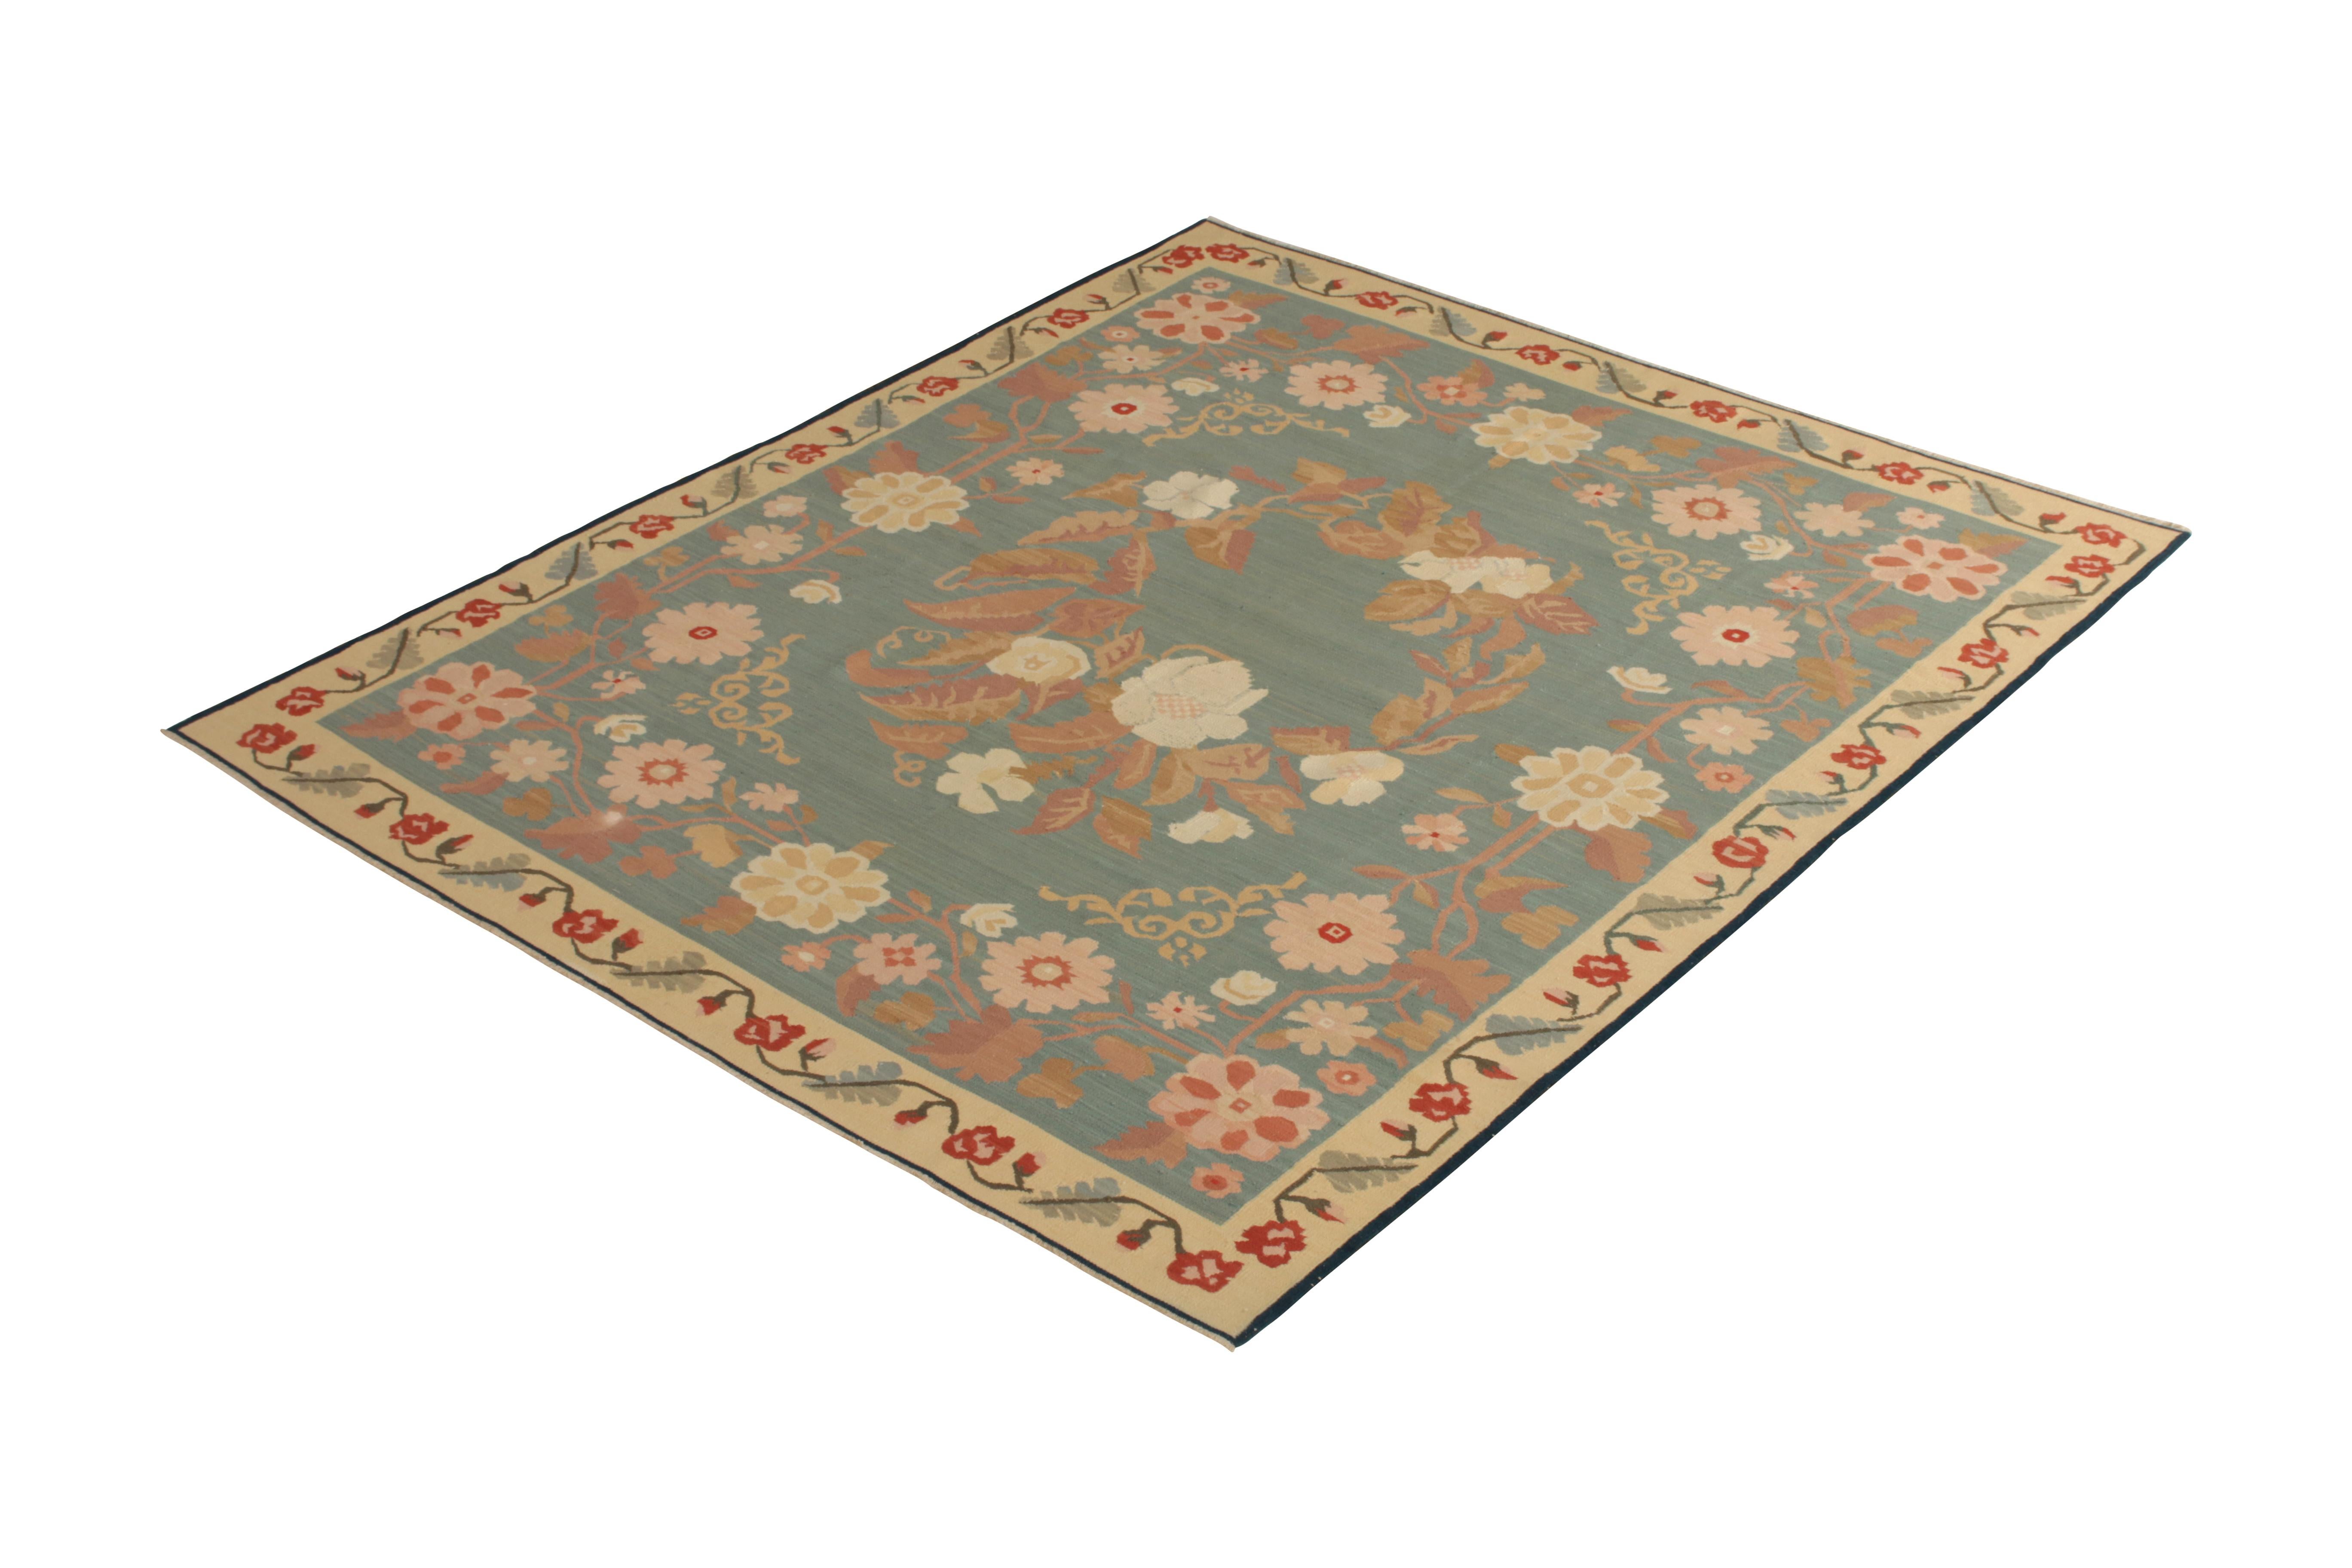 Handmade in flat-woven wool originating from Turkey circa 1950-1960, this midcentury rug is a unique vintage Bessarabian Kilim of notably forgiving color, employing a medallion style pattern and unique floral imagery in complementary hues of blue